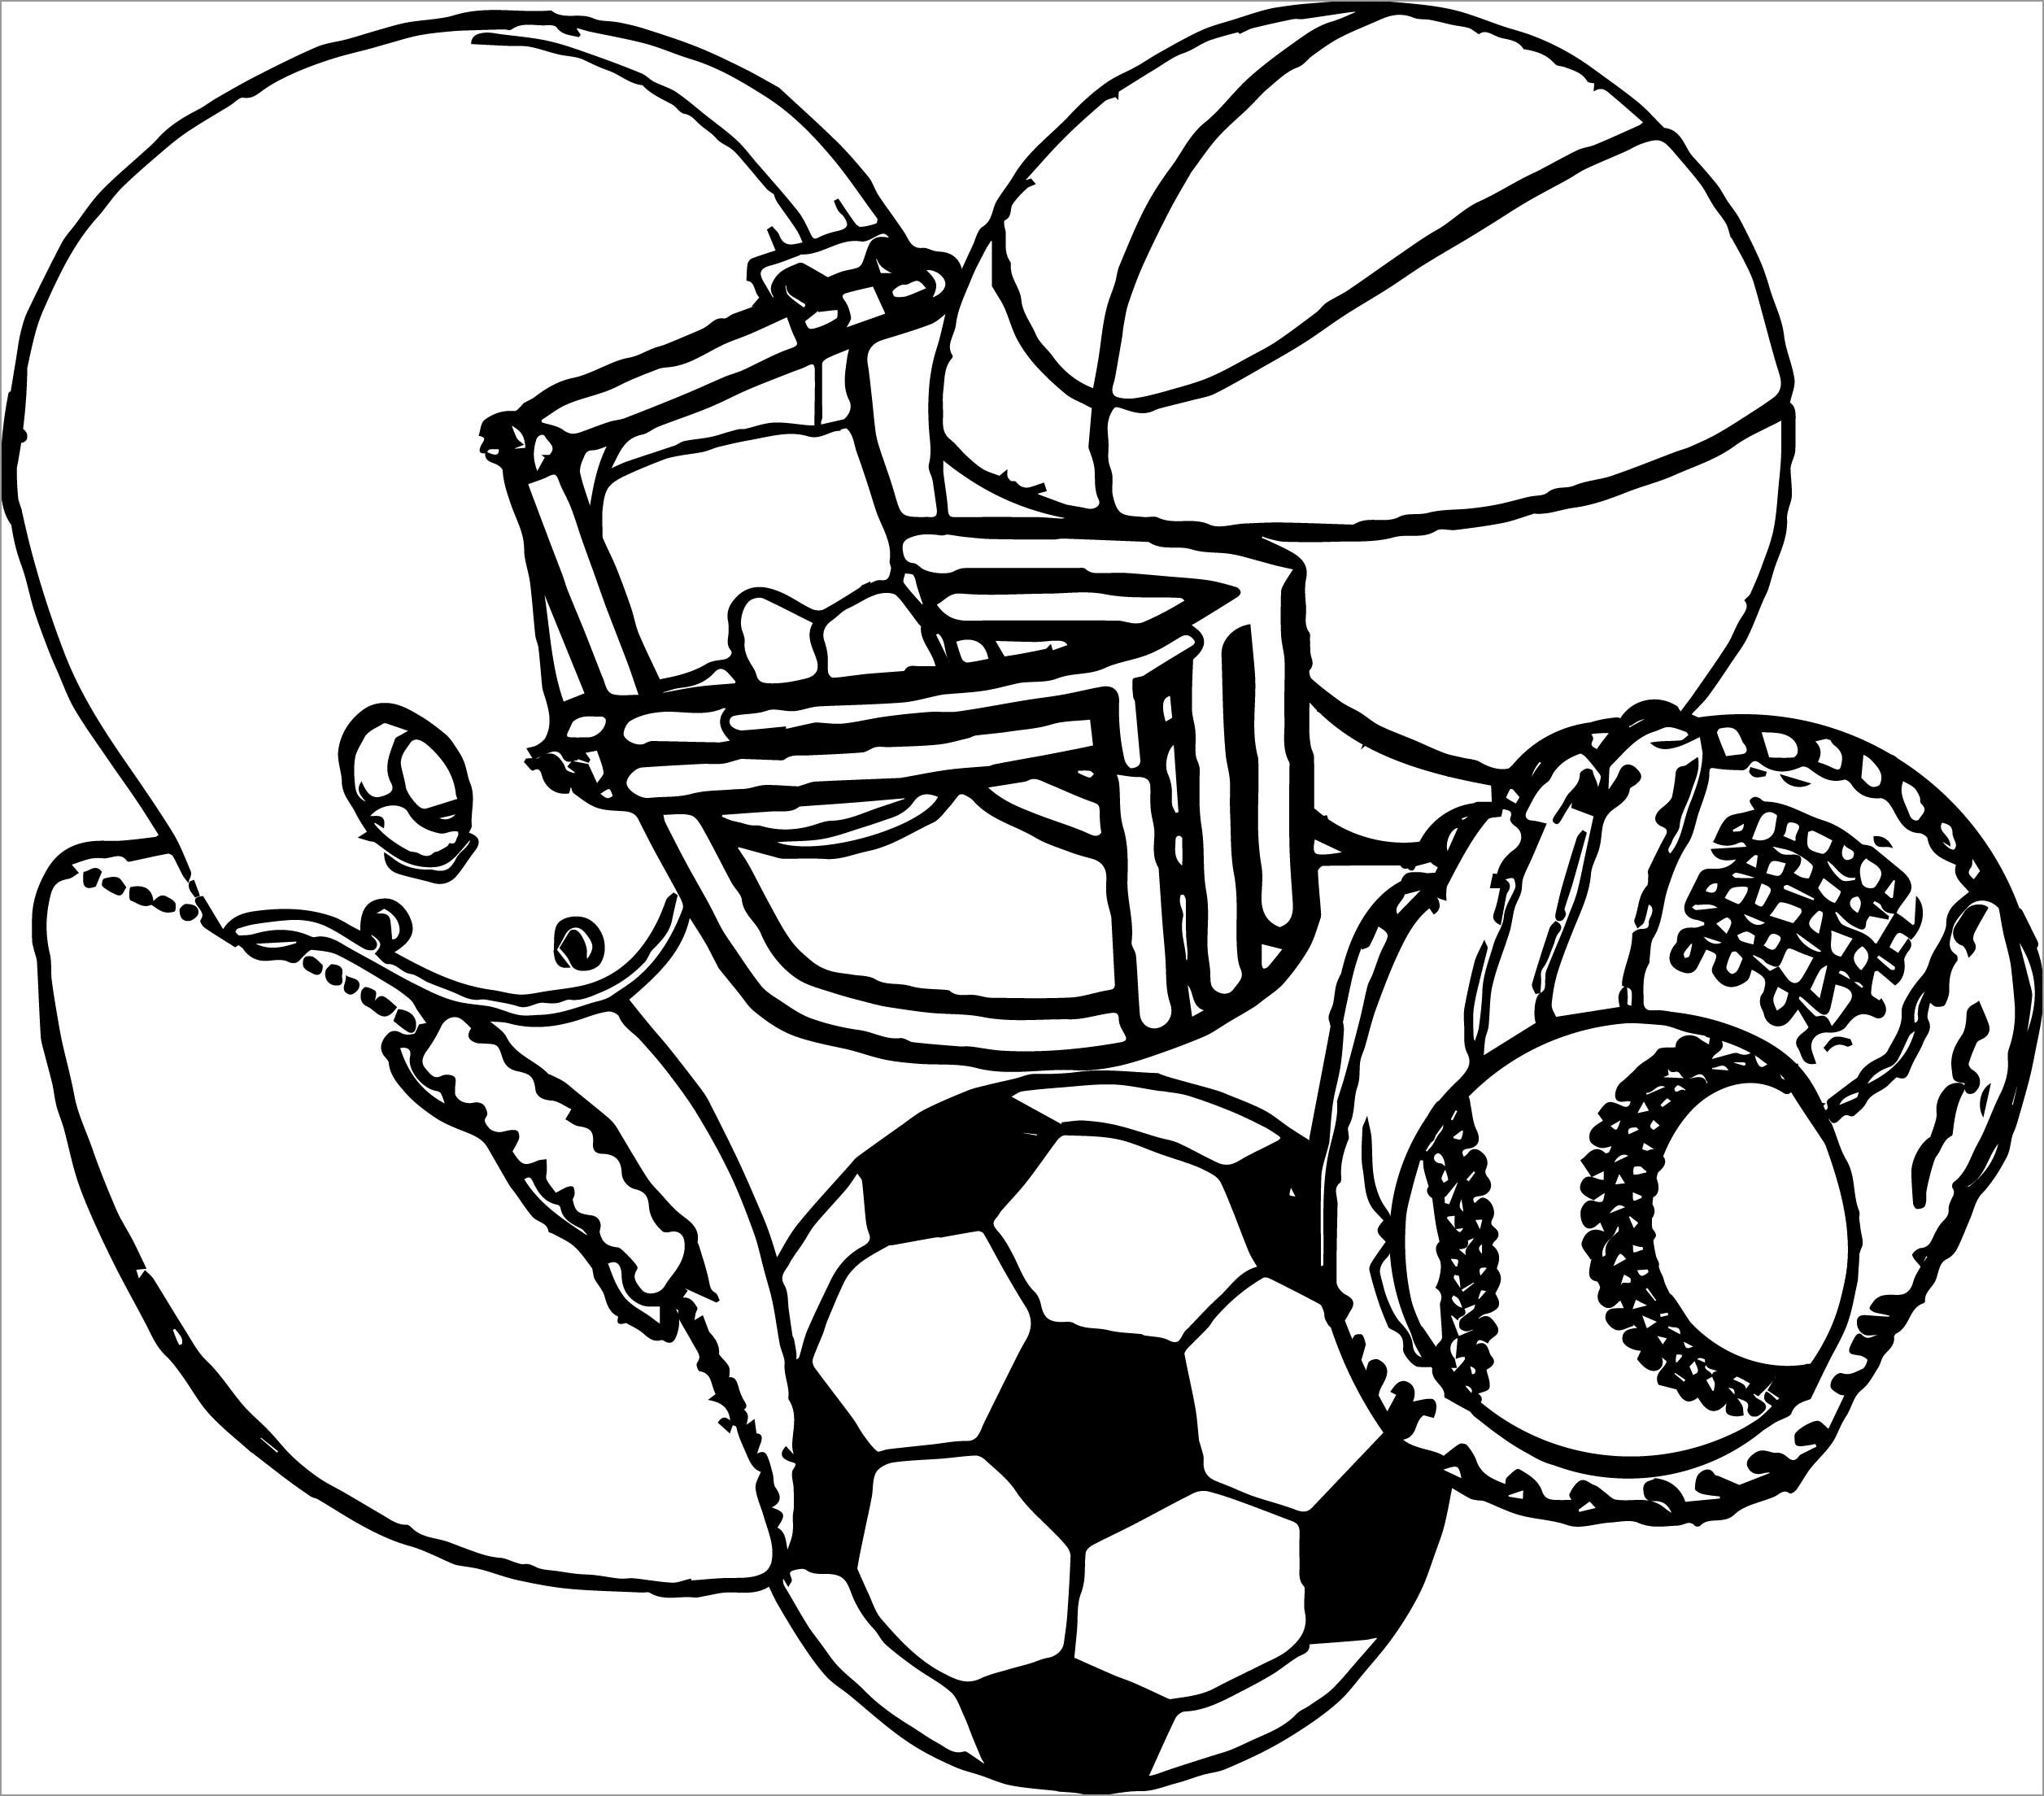 Baseball Equipment Coloring Pages